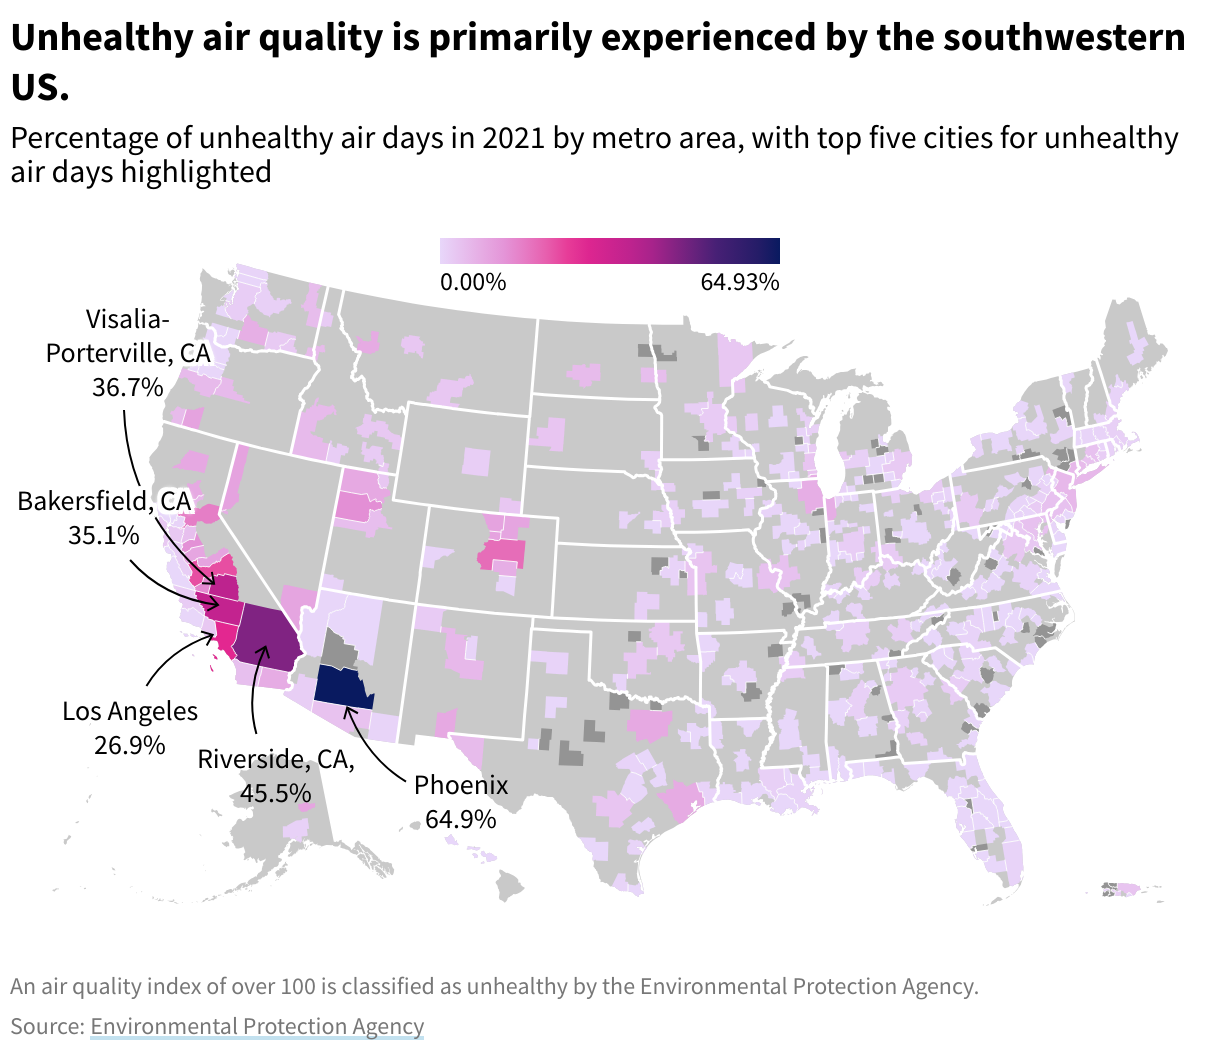 Map of metro areas colored by % unhealthy air quality days. 5 most unhealthy air days are Phoenix (64.9%), Riverside, CA,(45.5%), Visalia- Porterville, CA (36.7%), Bakersfield, CA (35.1%), Los Angeles (26.9%).